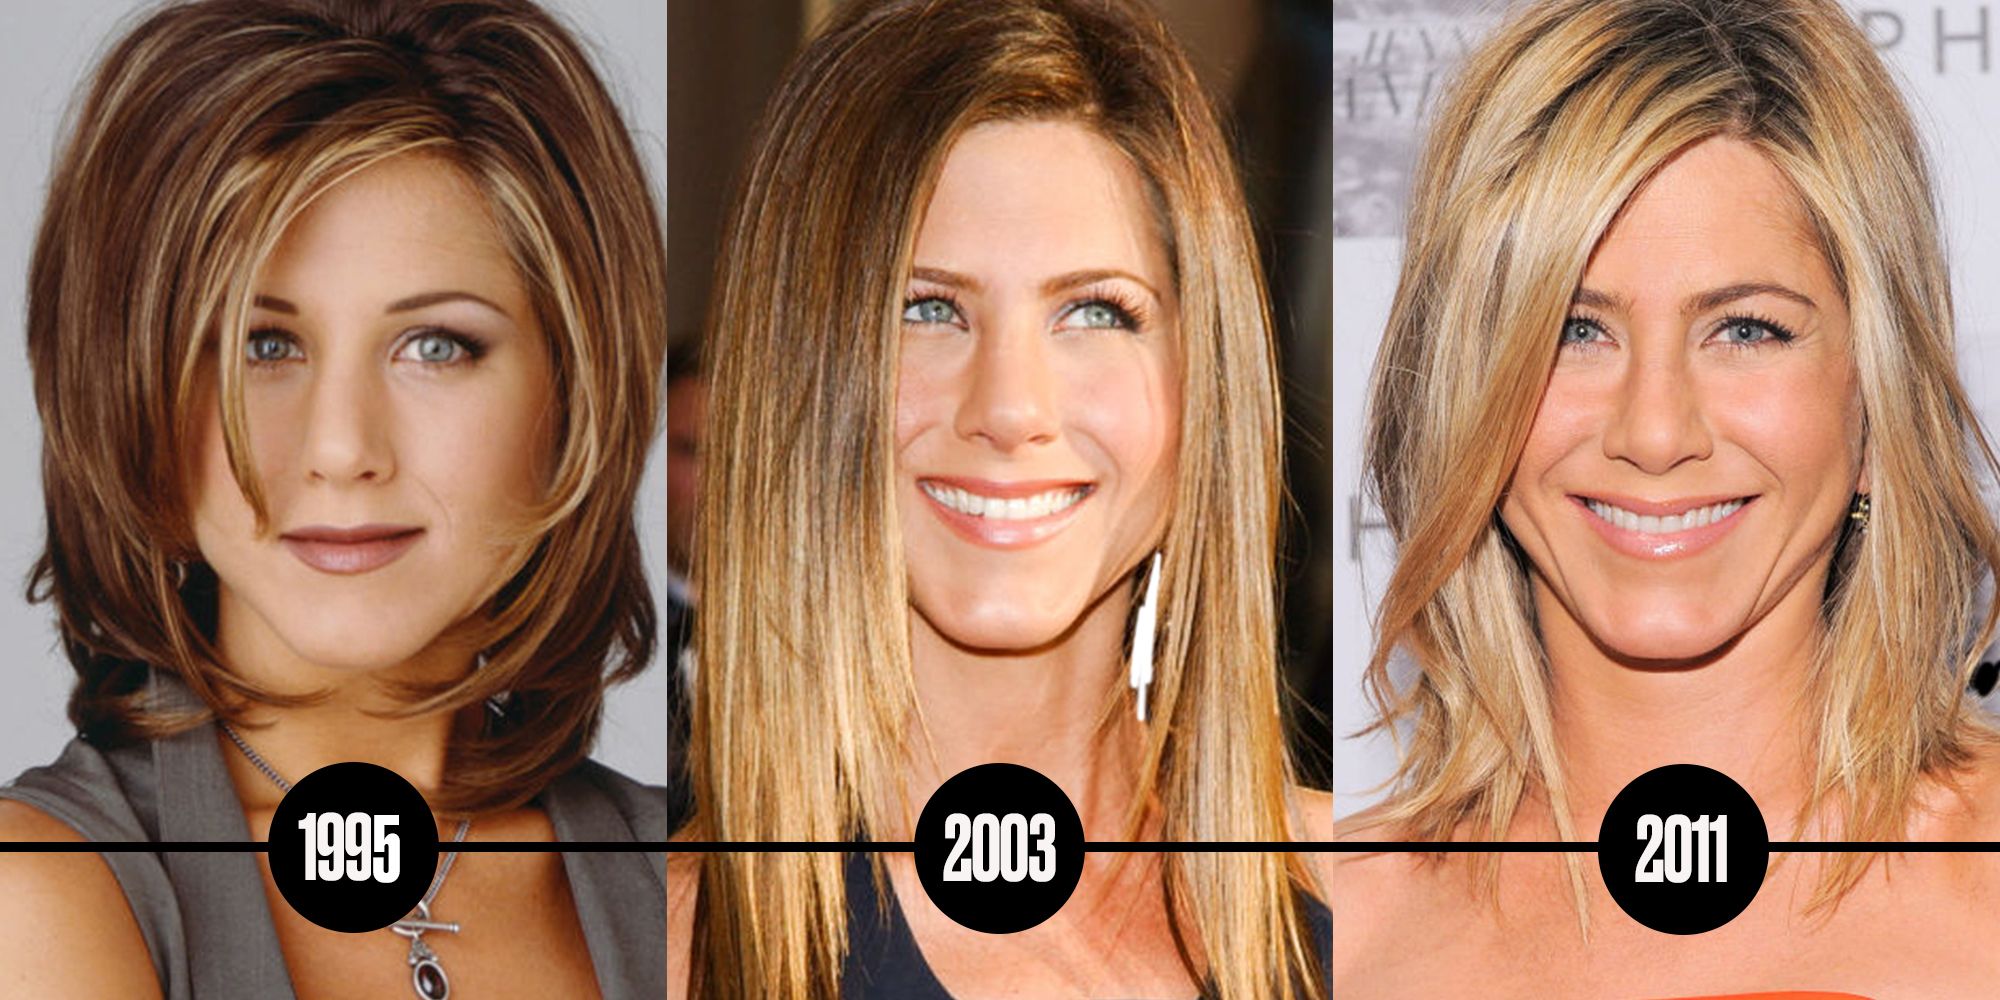 crystal tong recommends jennifer aniston giving head pic